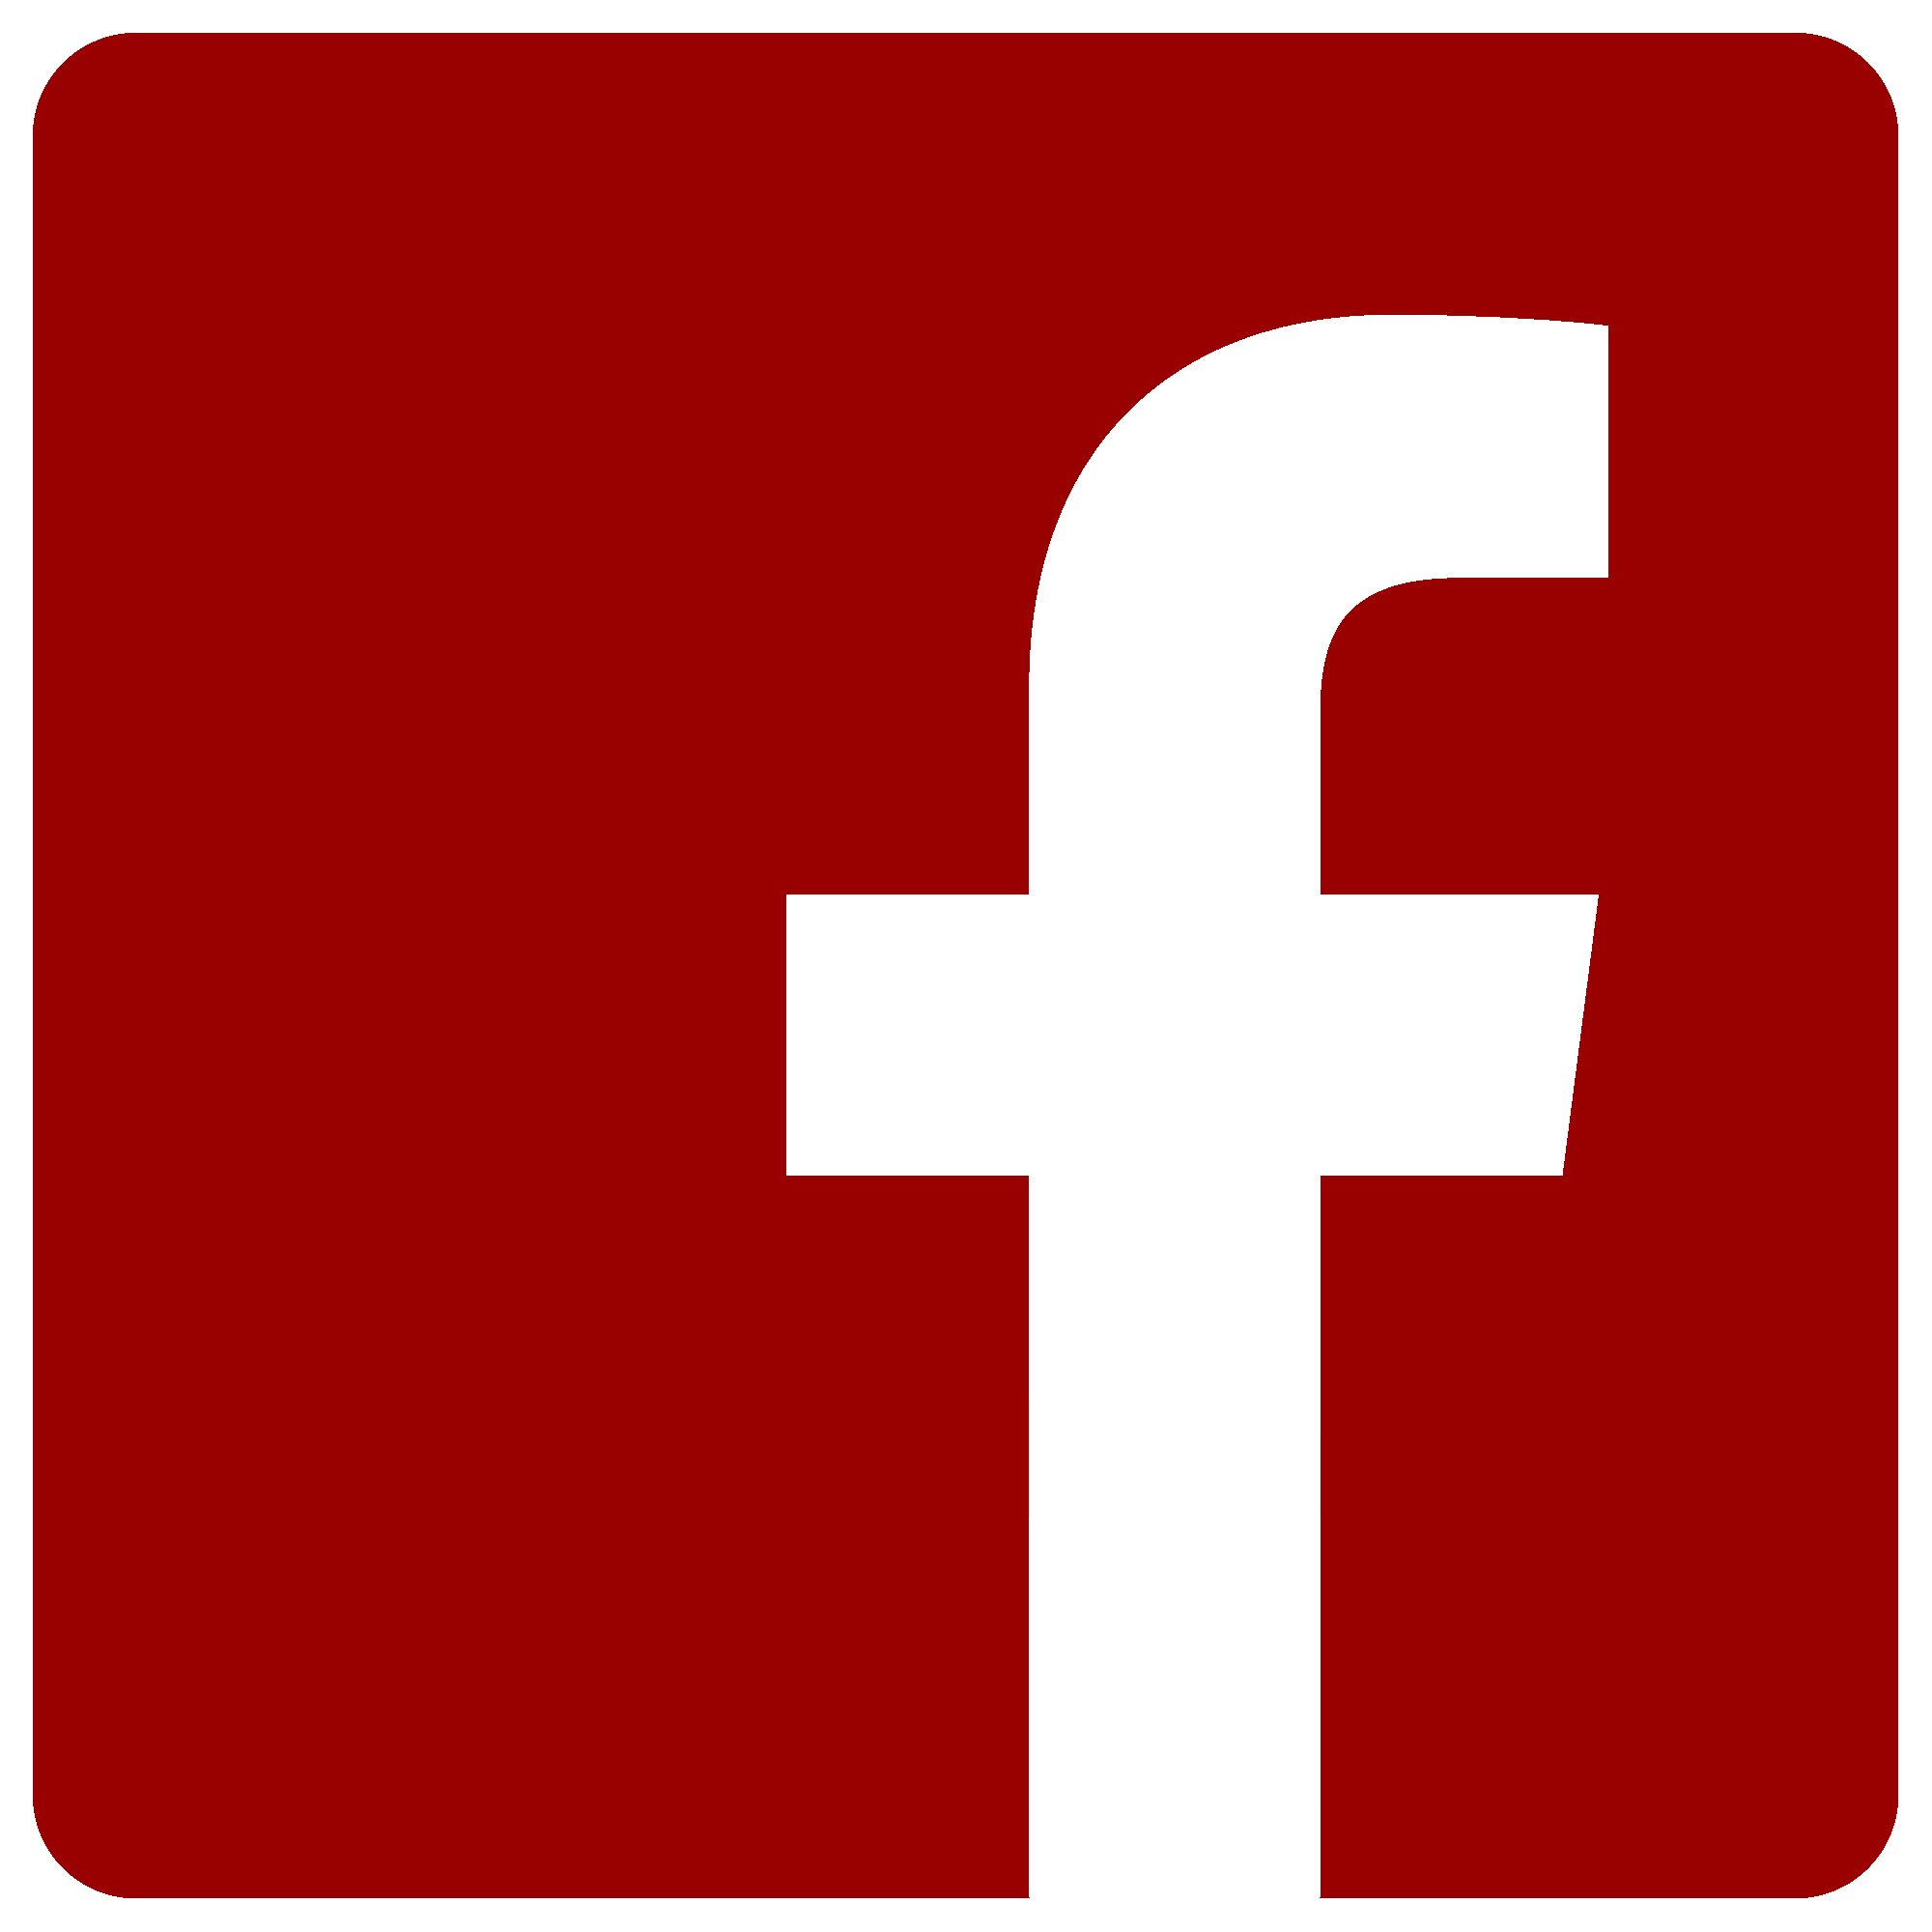 Original Red Logo - File:Facebook-logo-red.png - Wikimedia Commons